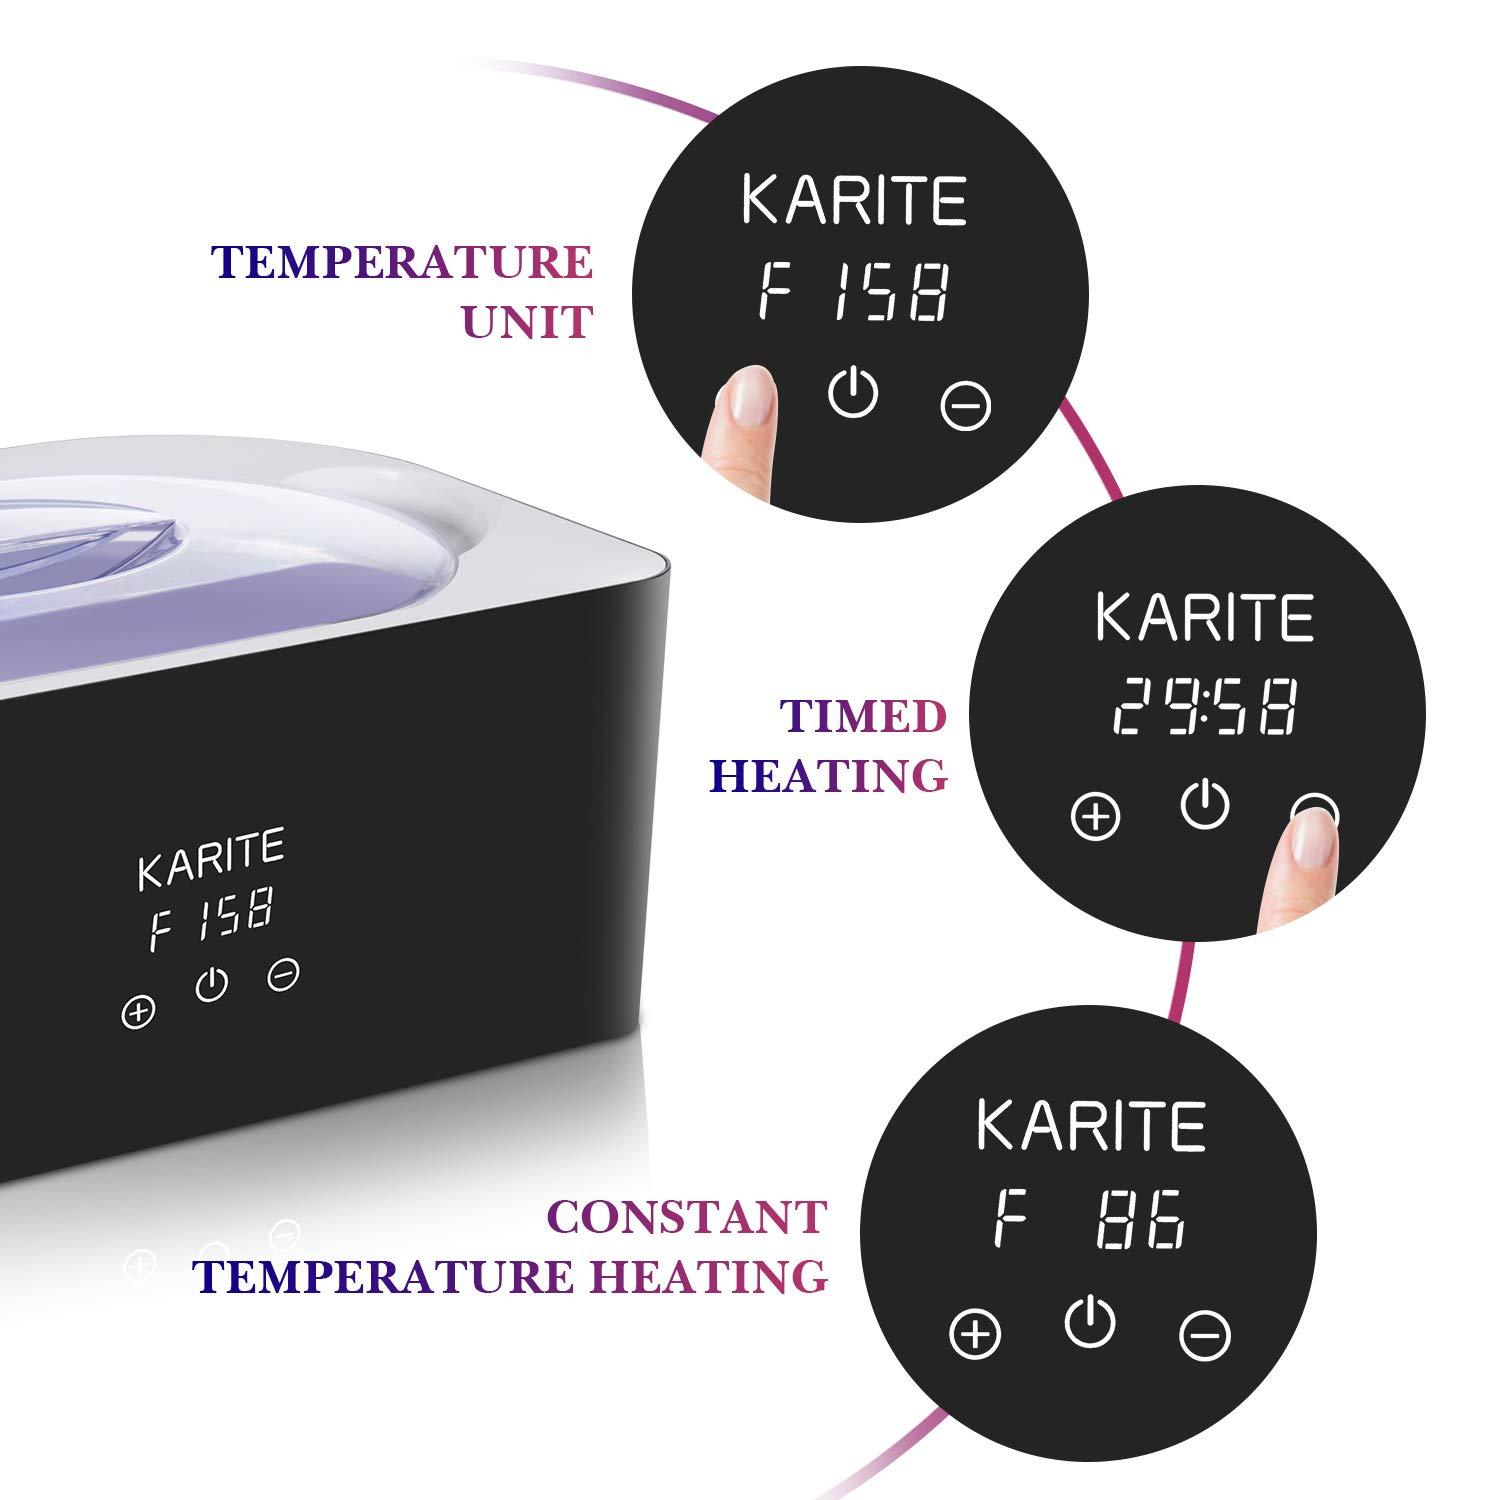 Paraffin Wax Machine for Hand and Feet - Karite Paraffin Wax Bath 4000ml Paraffin Wax Warmer Moisturizing Kit Auto-time and Keep Warm Paraffin Hand Wax Machine - image 4 of 8